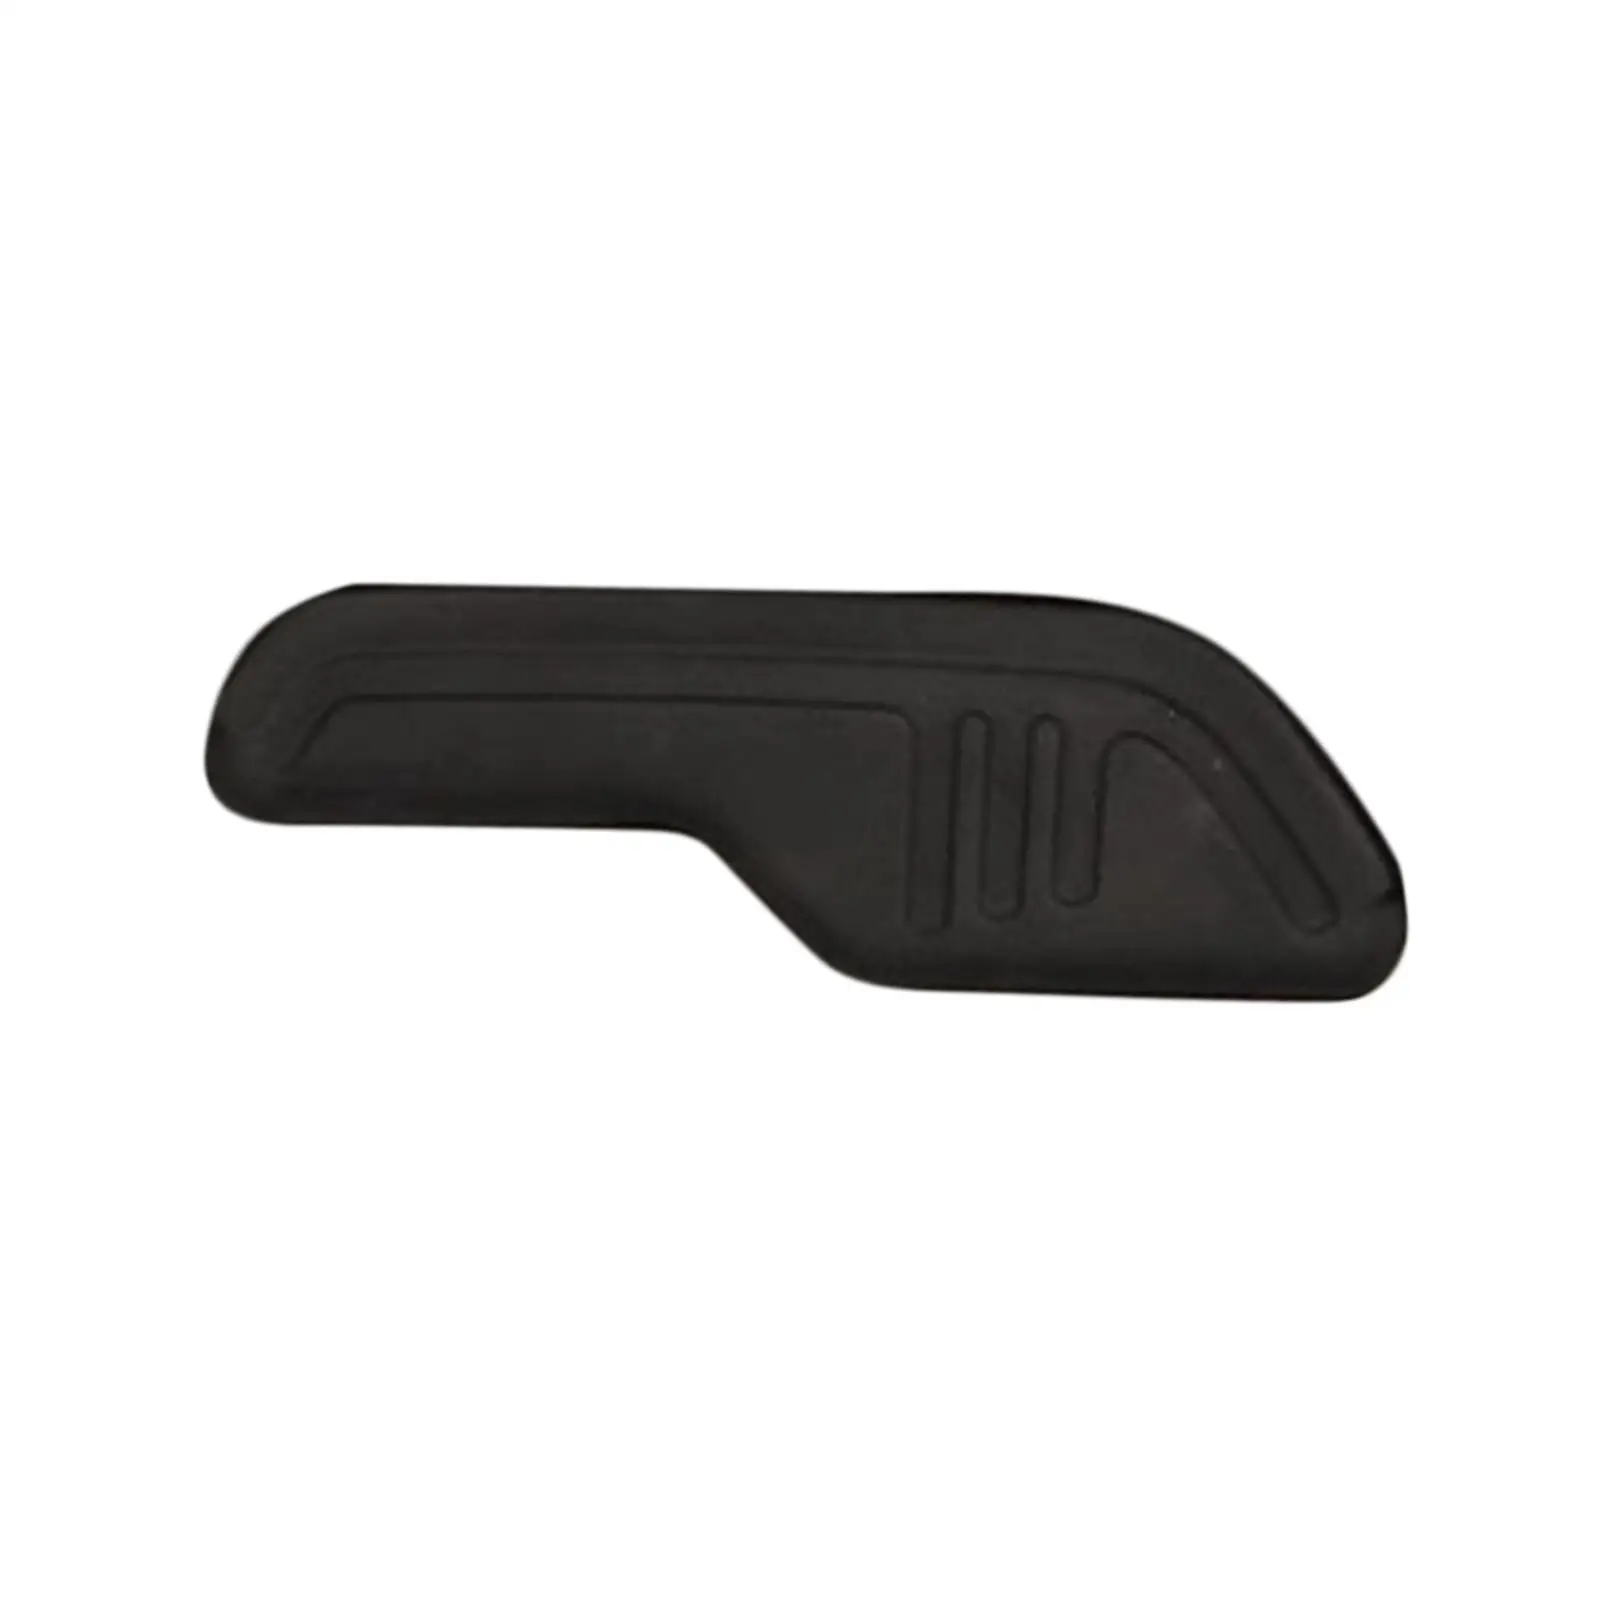 Charging Port Protective Cover Silicone Charging Port Dust Protector for Byd